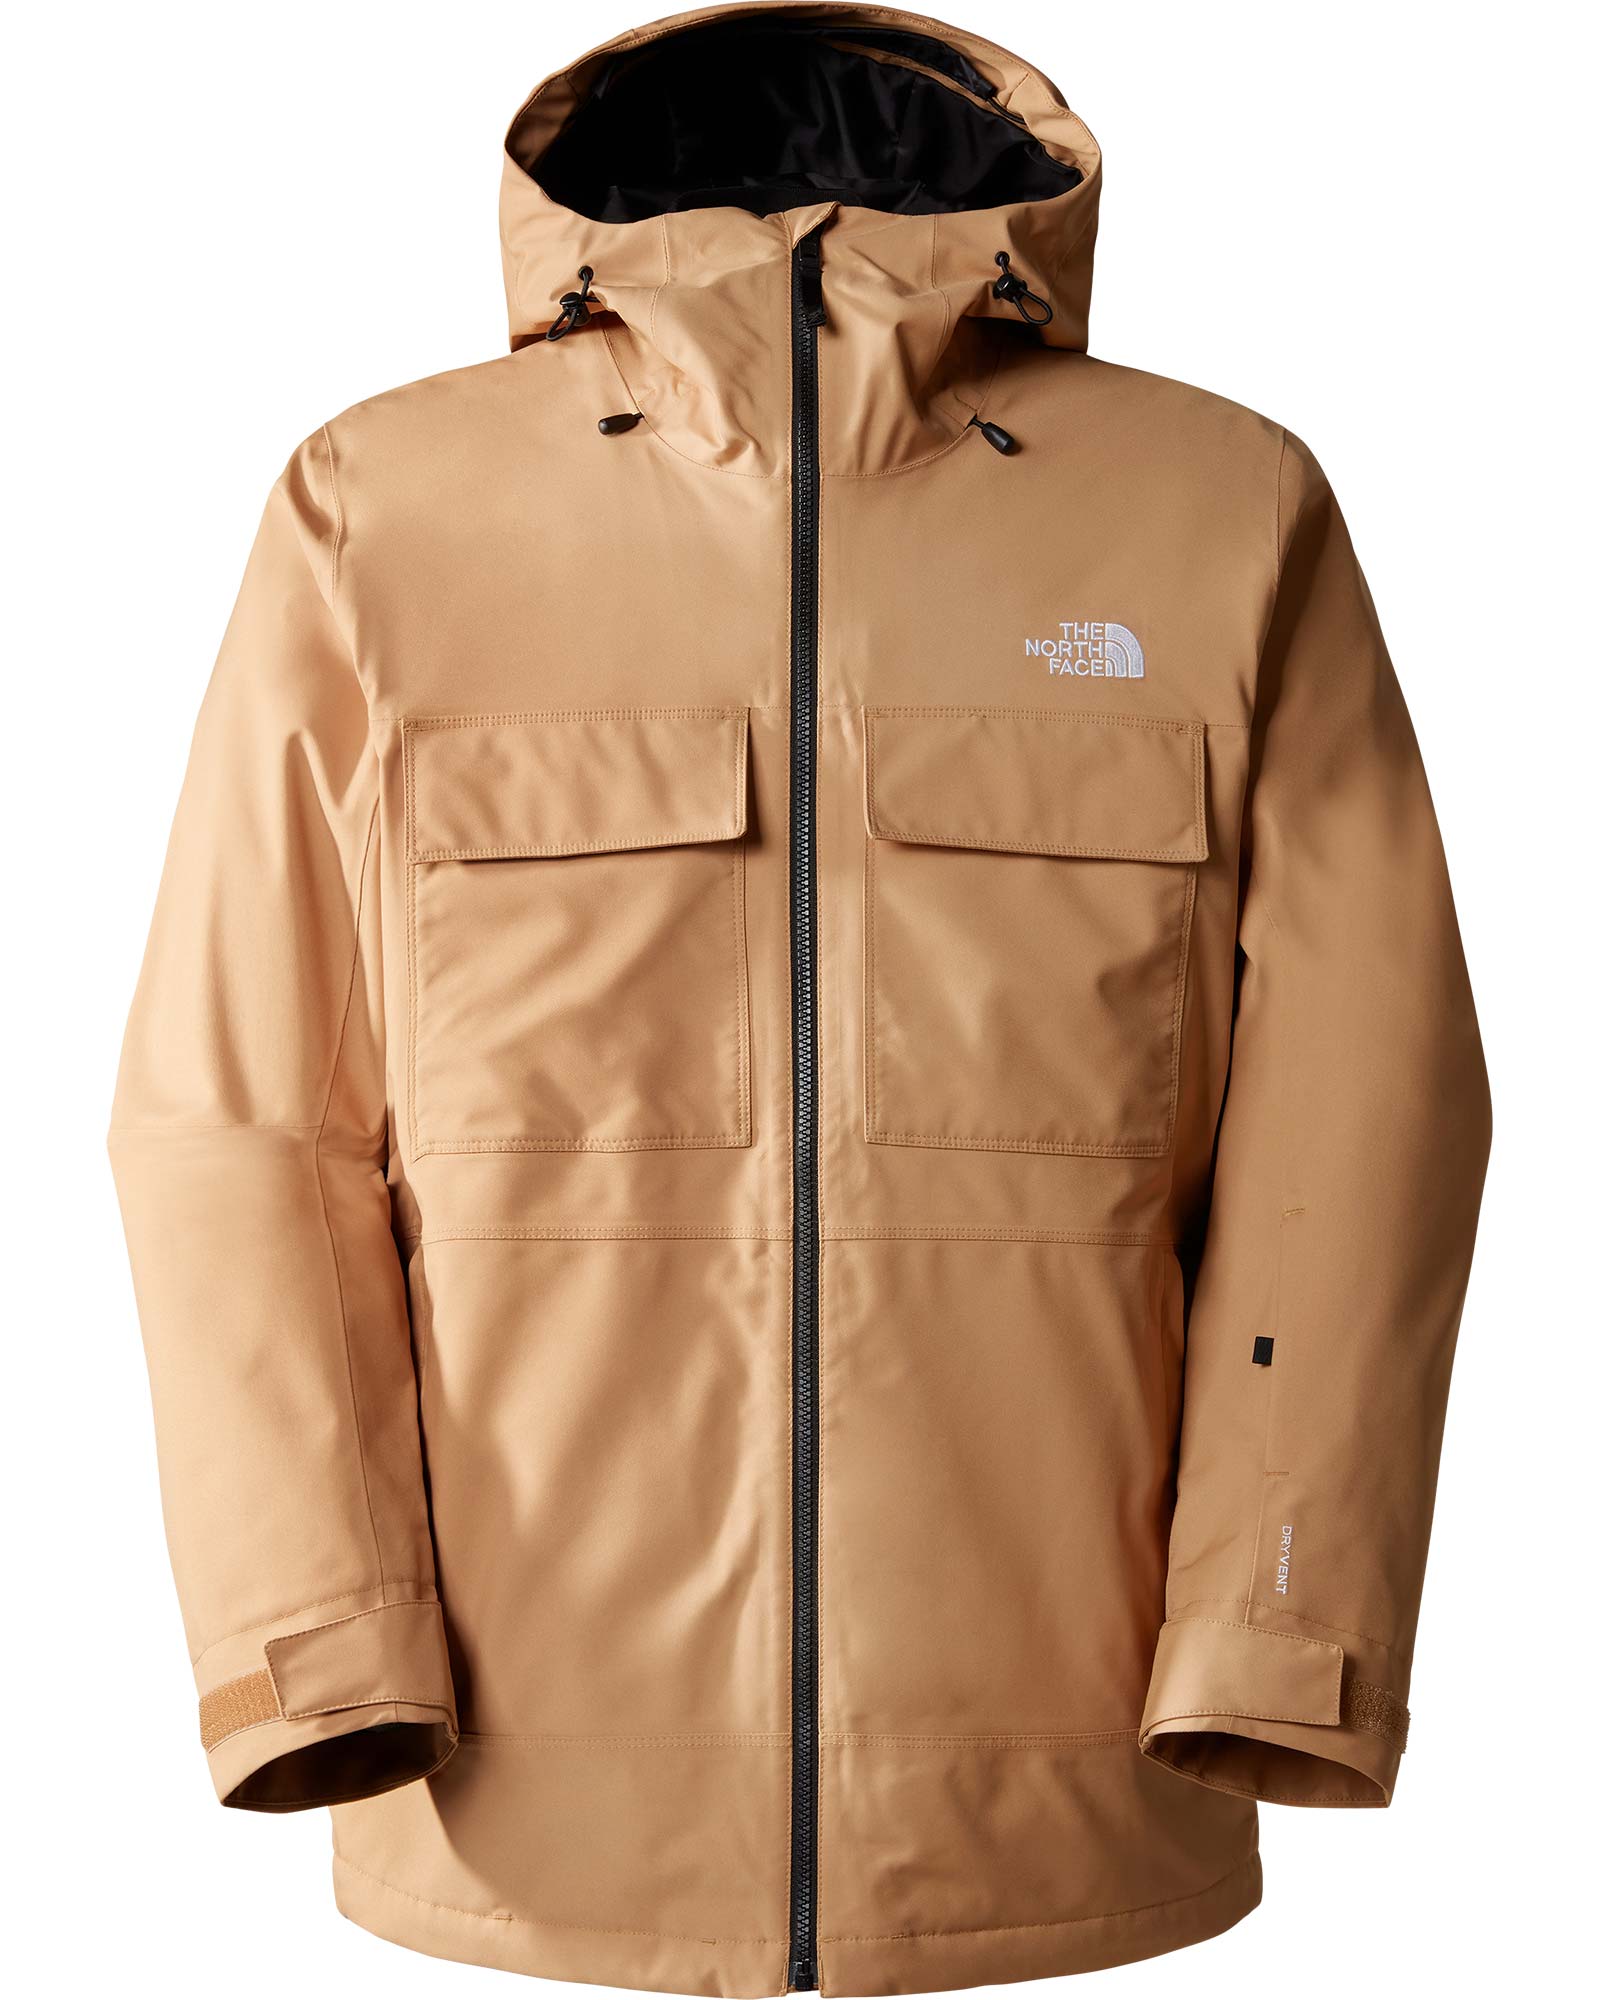 The North Face Men’s Fourbarrel Triclimate Jacket - Almond Butter/TNF Black M